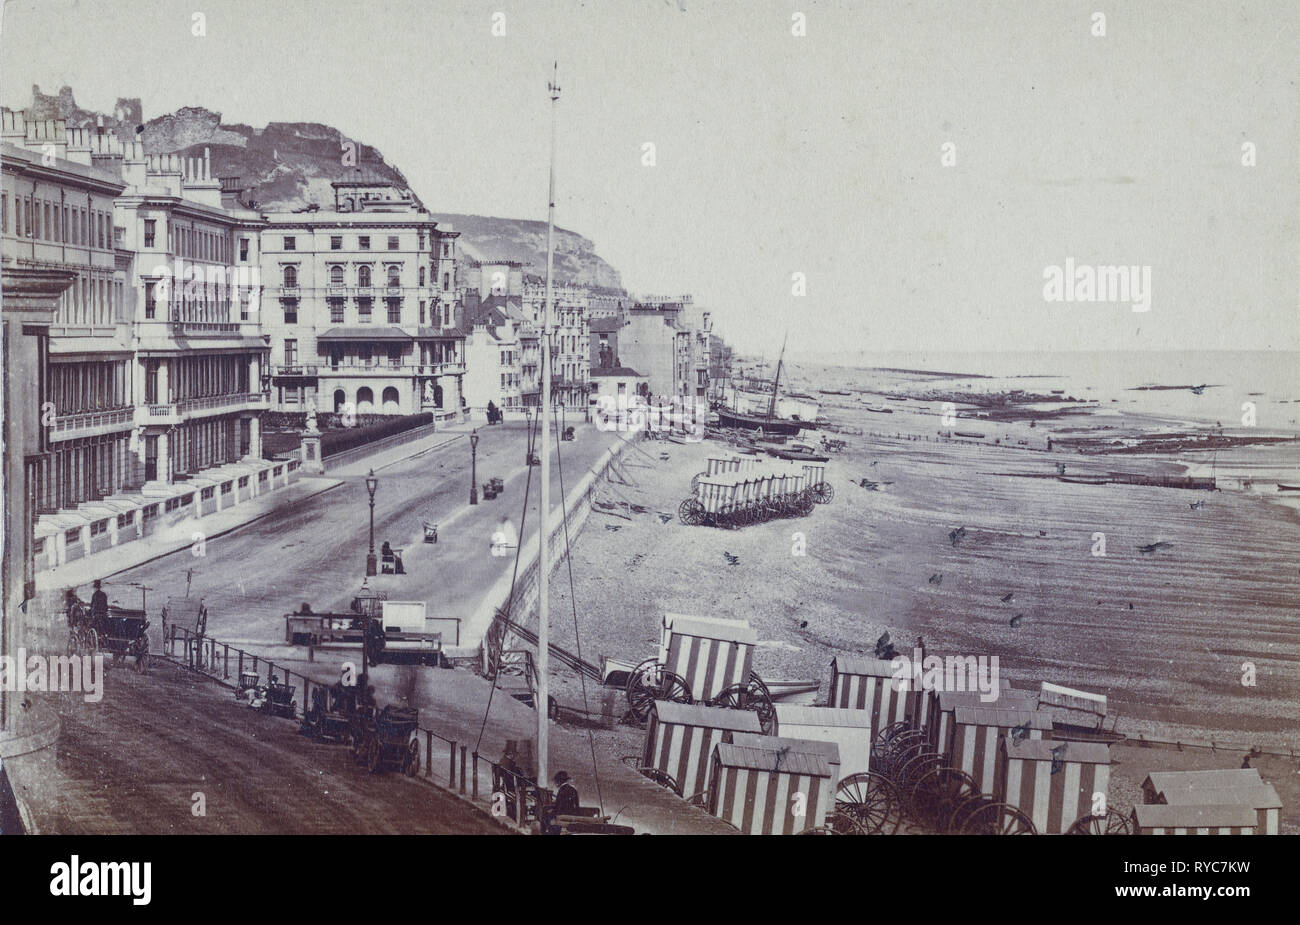 St. Leonards [England]; F.S. Mann (British, active Hastings, England 1860s - 1870s); April 17, 1866; Albumen silver print;  Digital image courtesy of the Getty's Open Content Program. Stock Photo